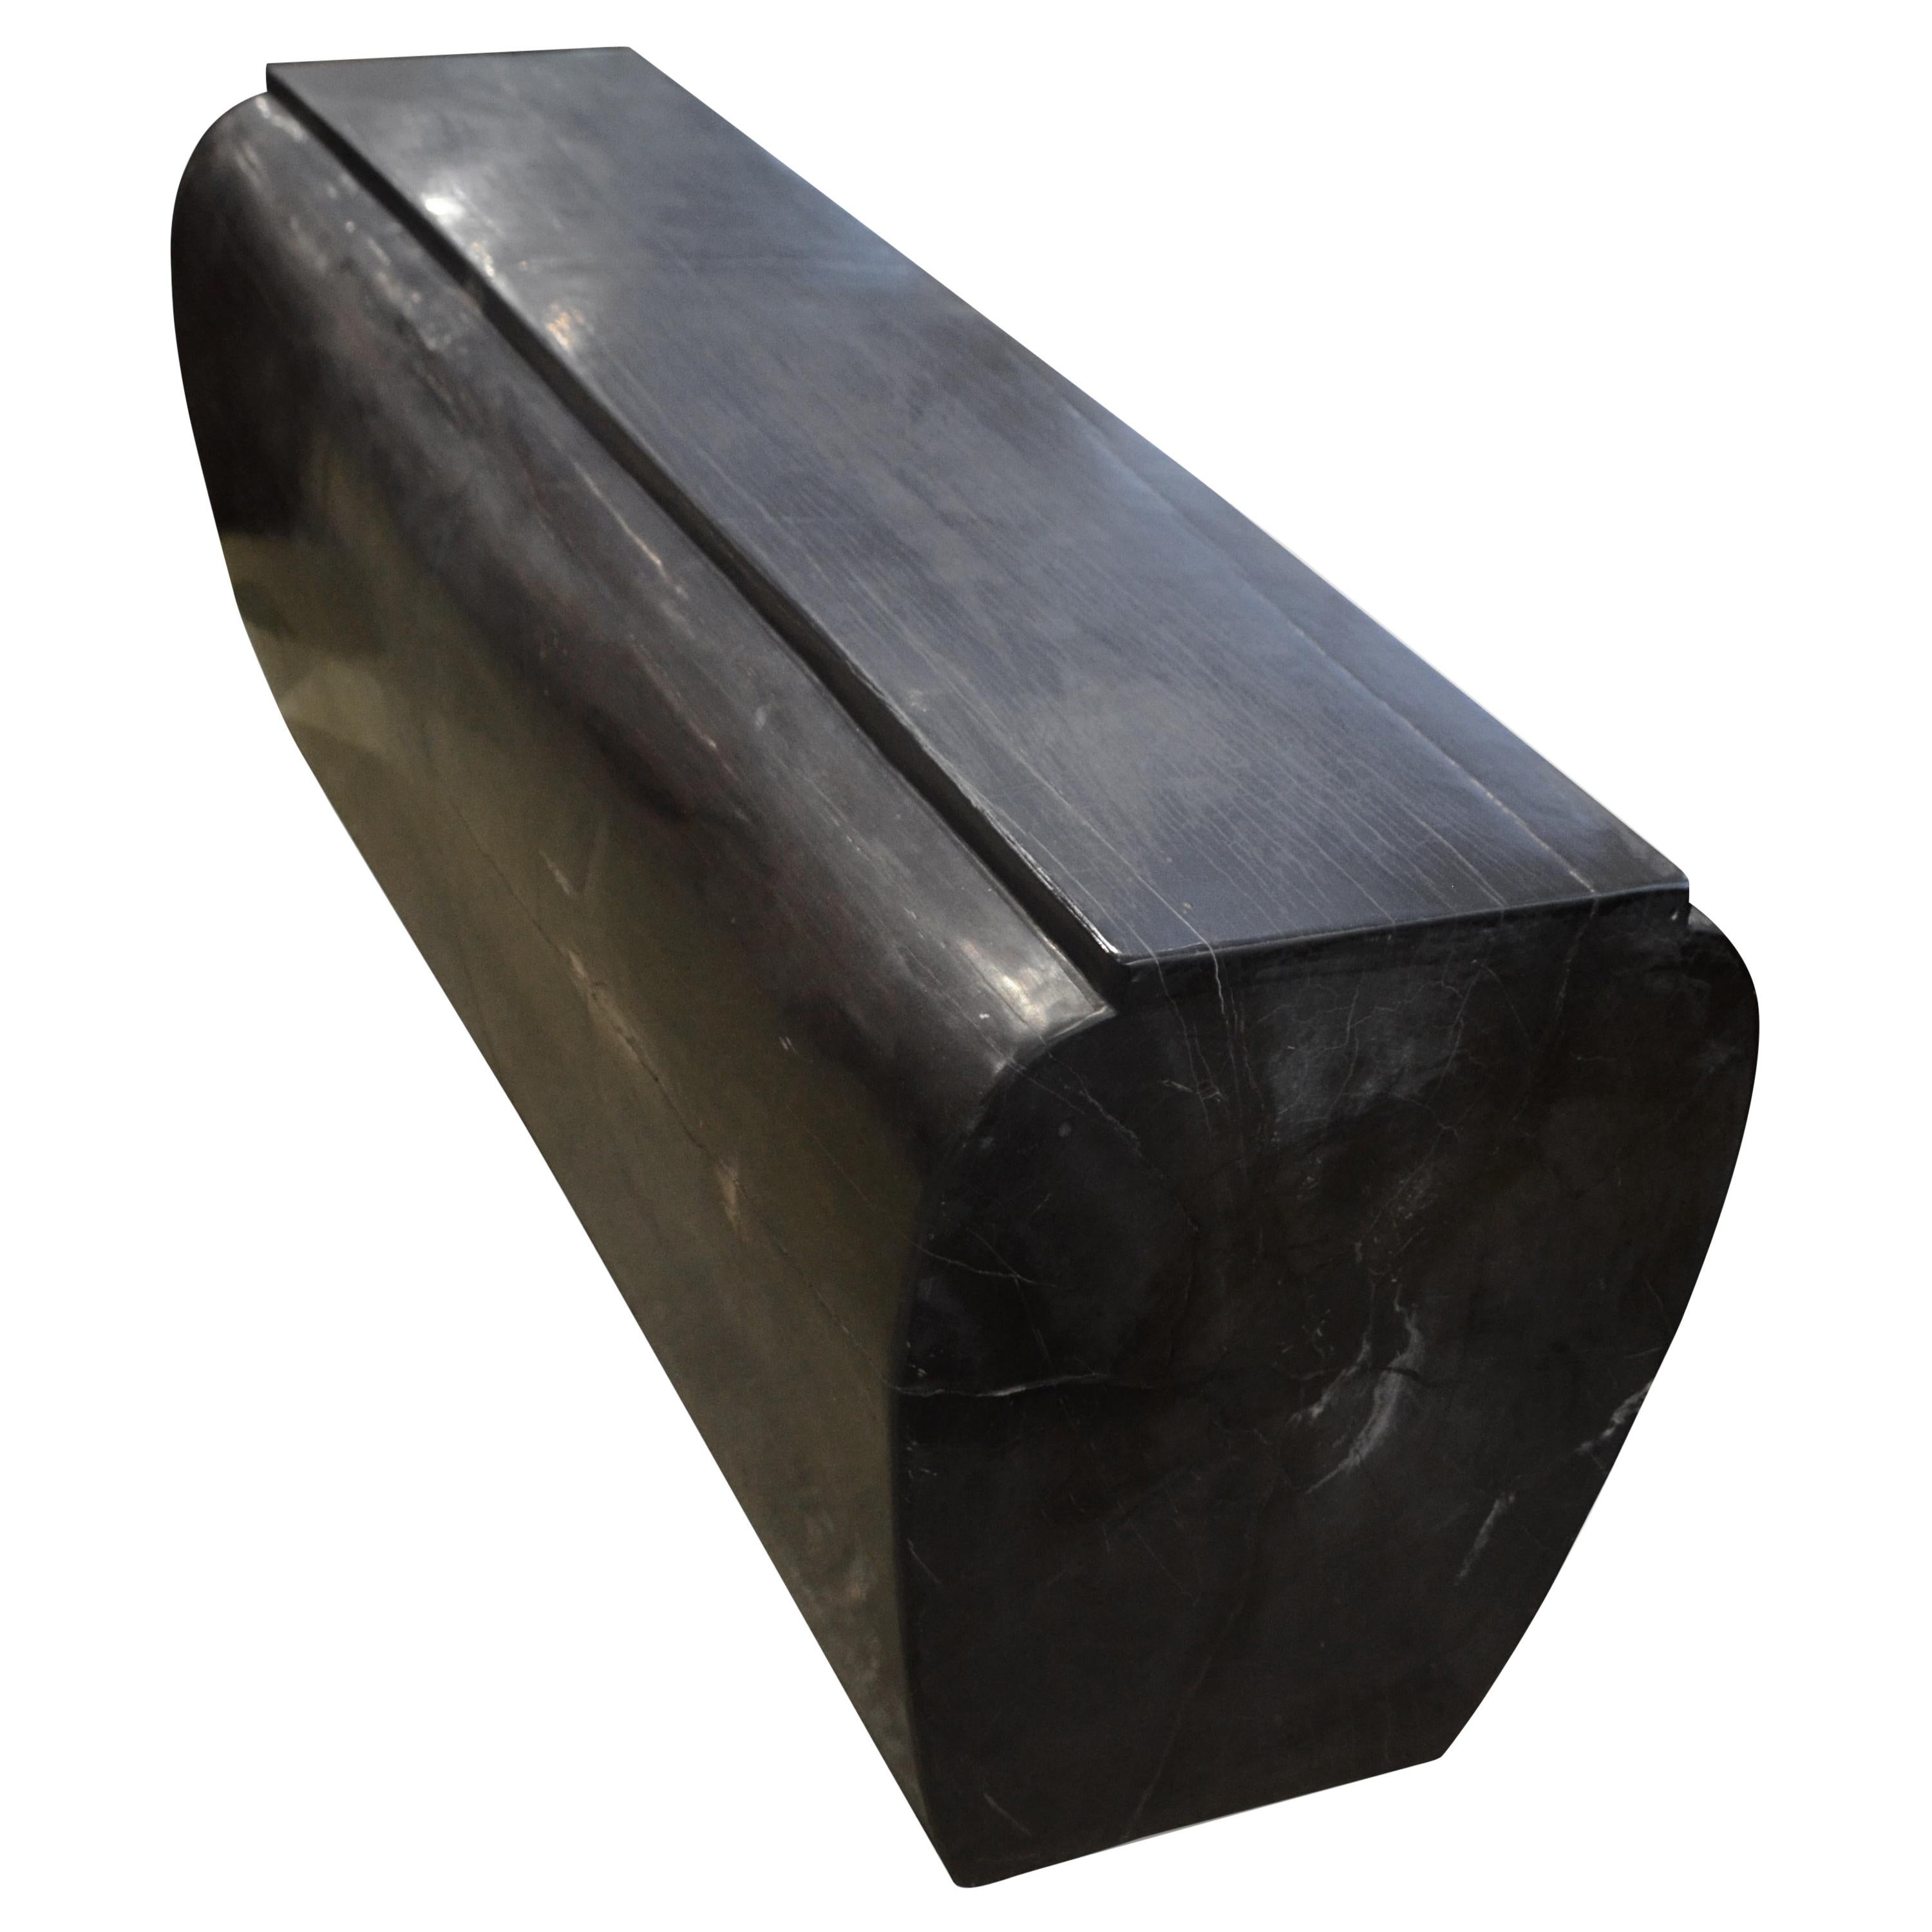 High quality super smooth petrified wood log bench. Stunning charcoal grey and black tones make this an impressive piece for any space. Beautifully shaped into a stunning sculptural bench with a bevelled top. To shape petrified wood with such